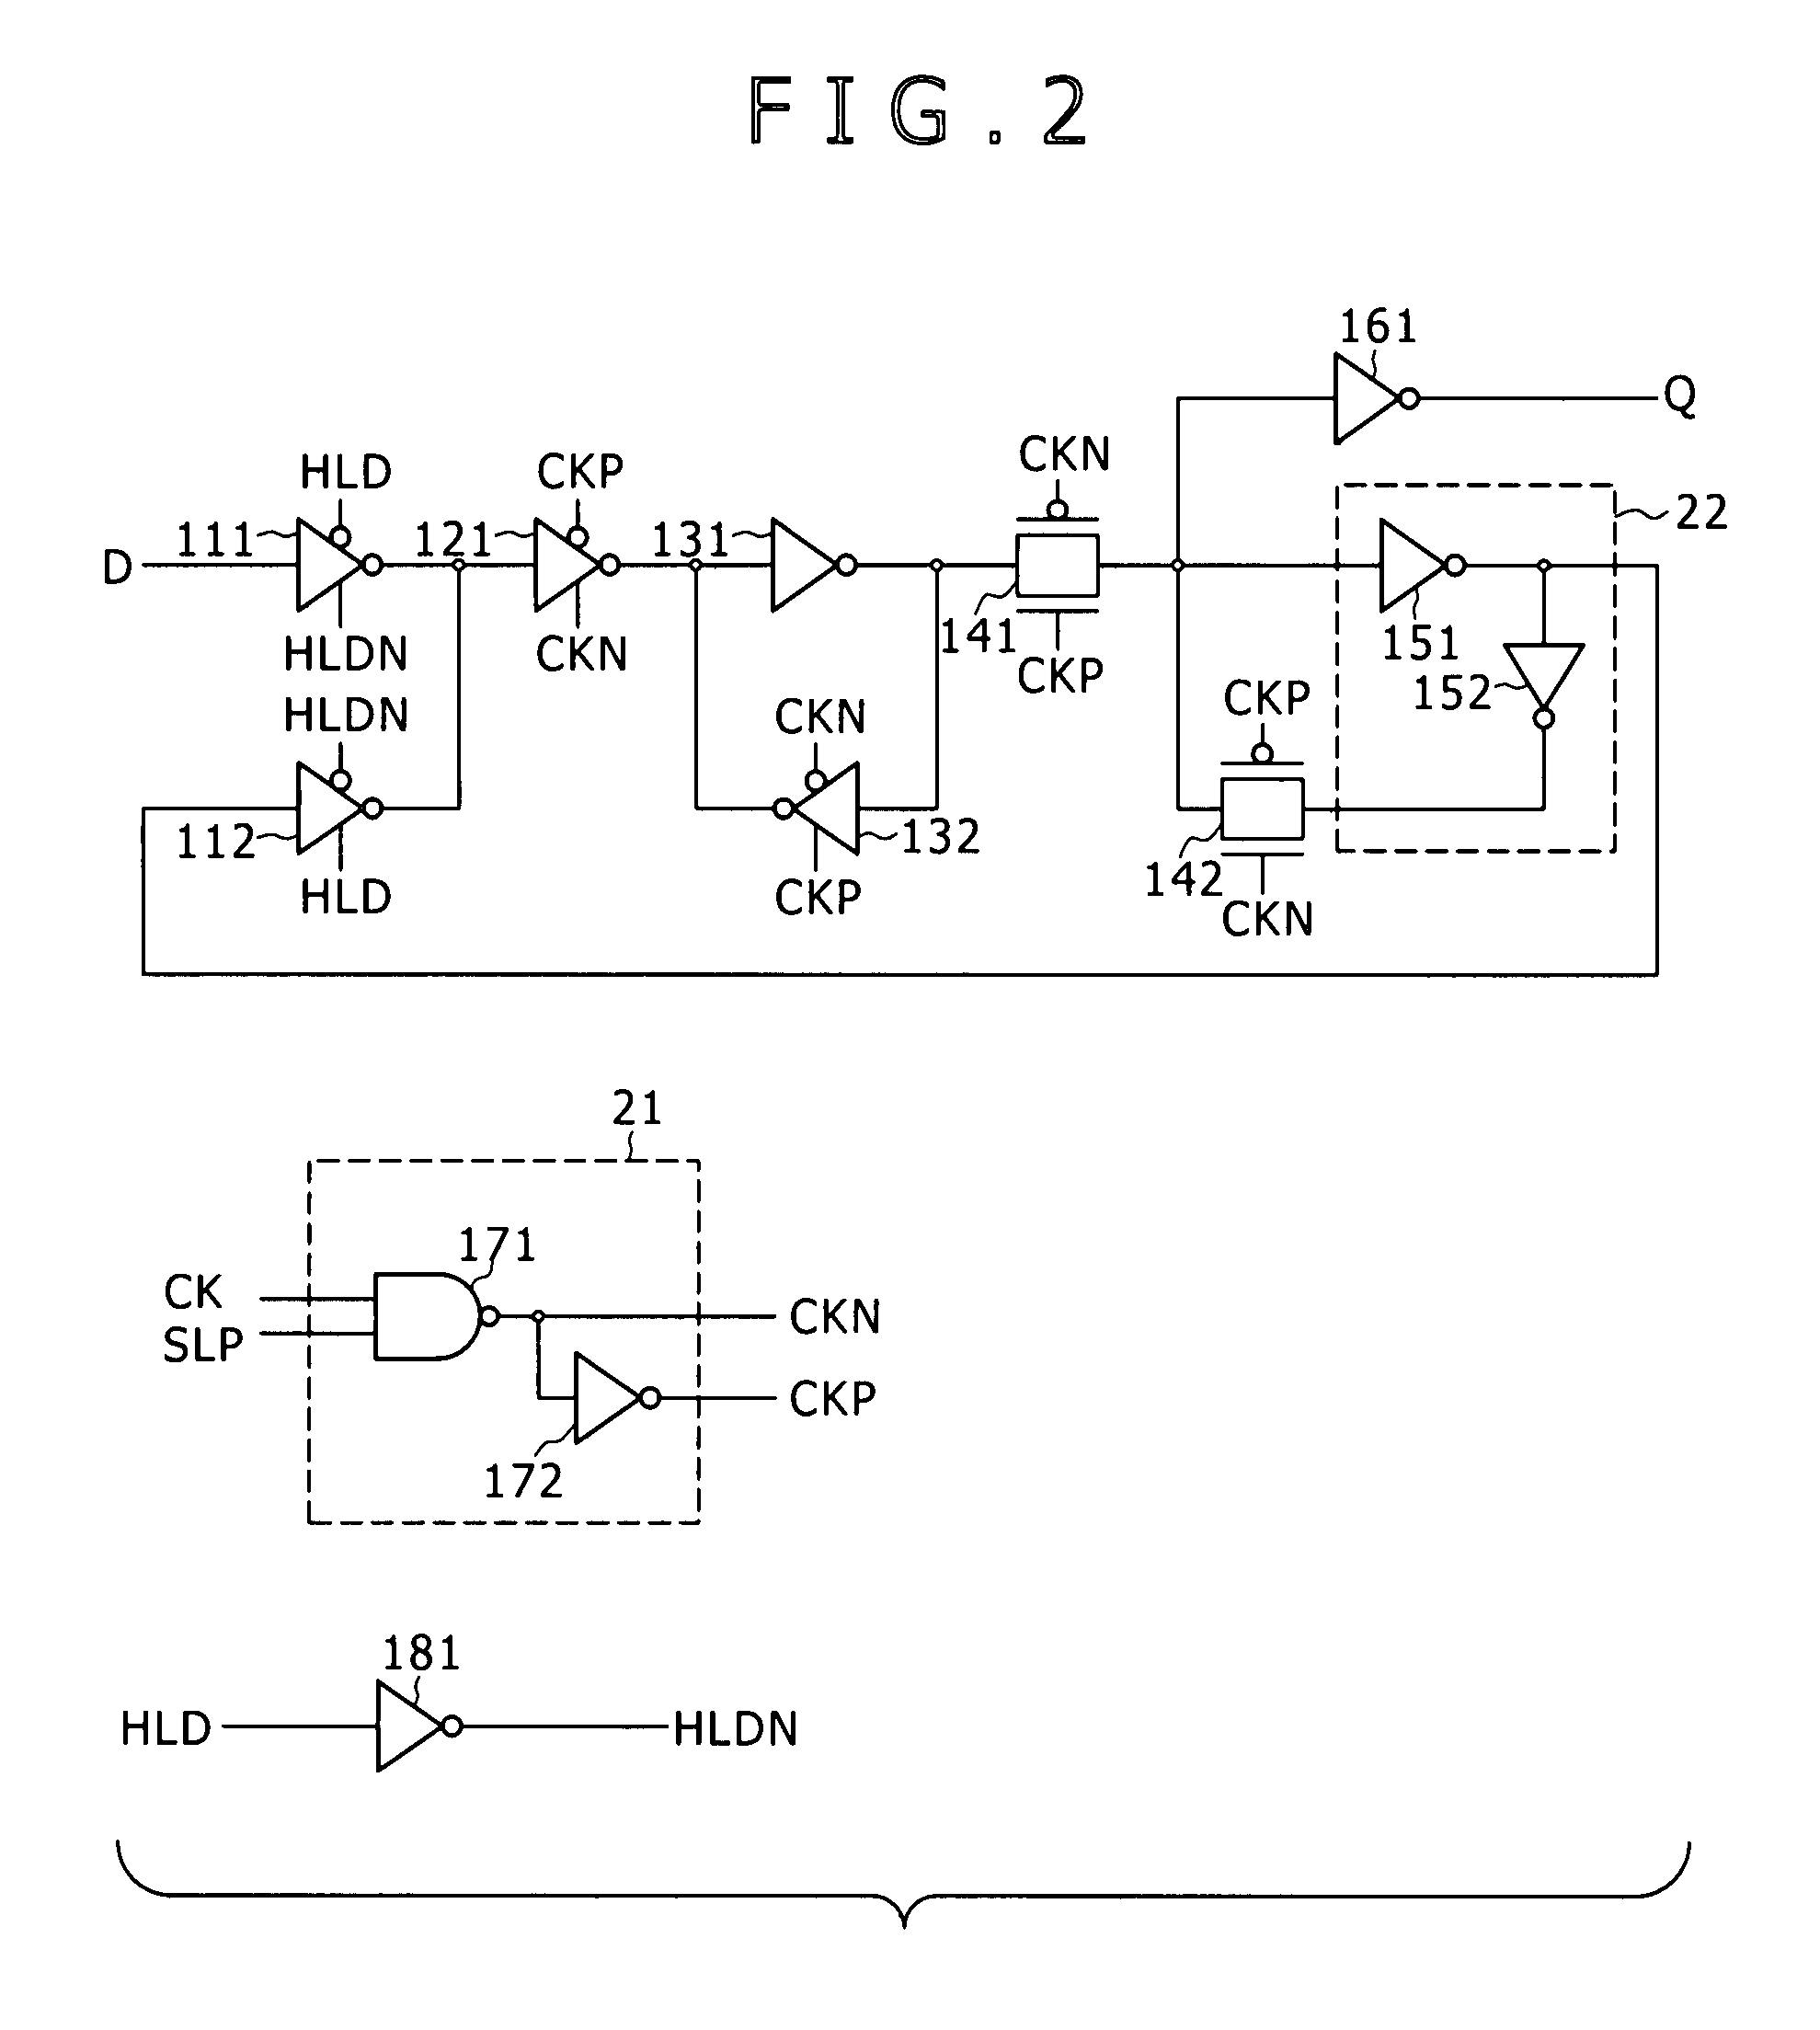 Flip-flop and semiconductor integrated circuit